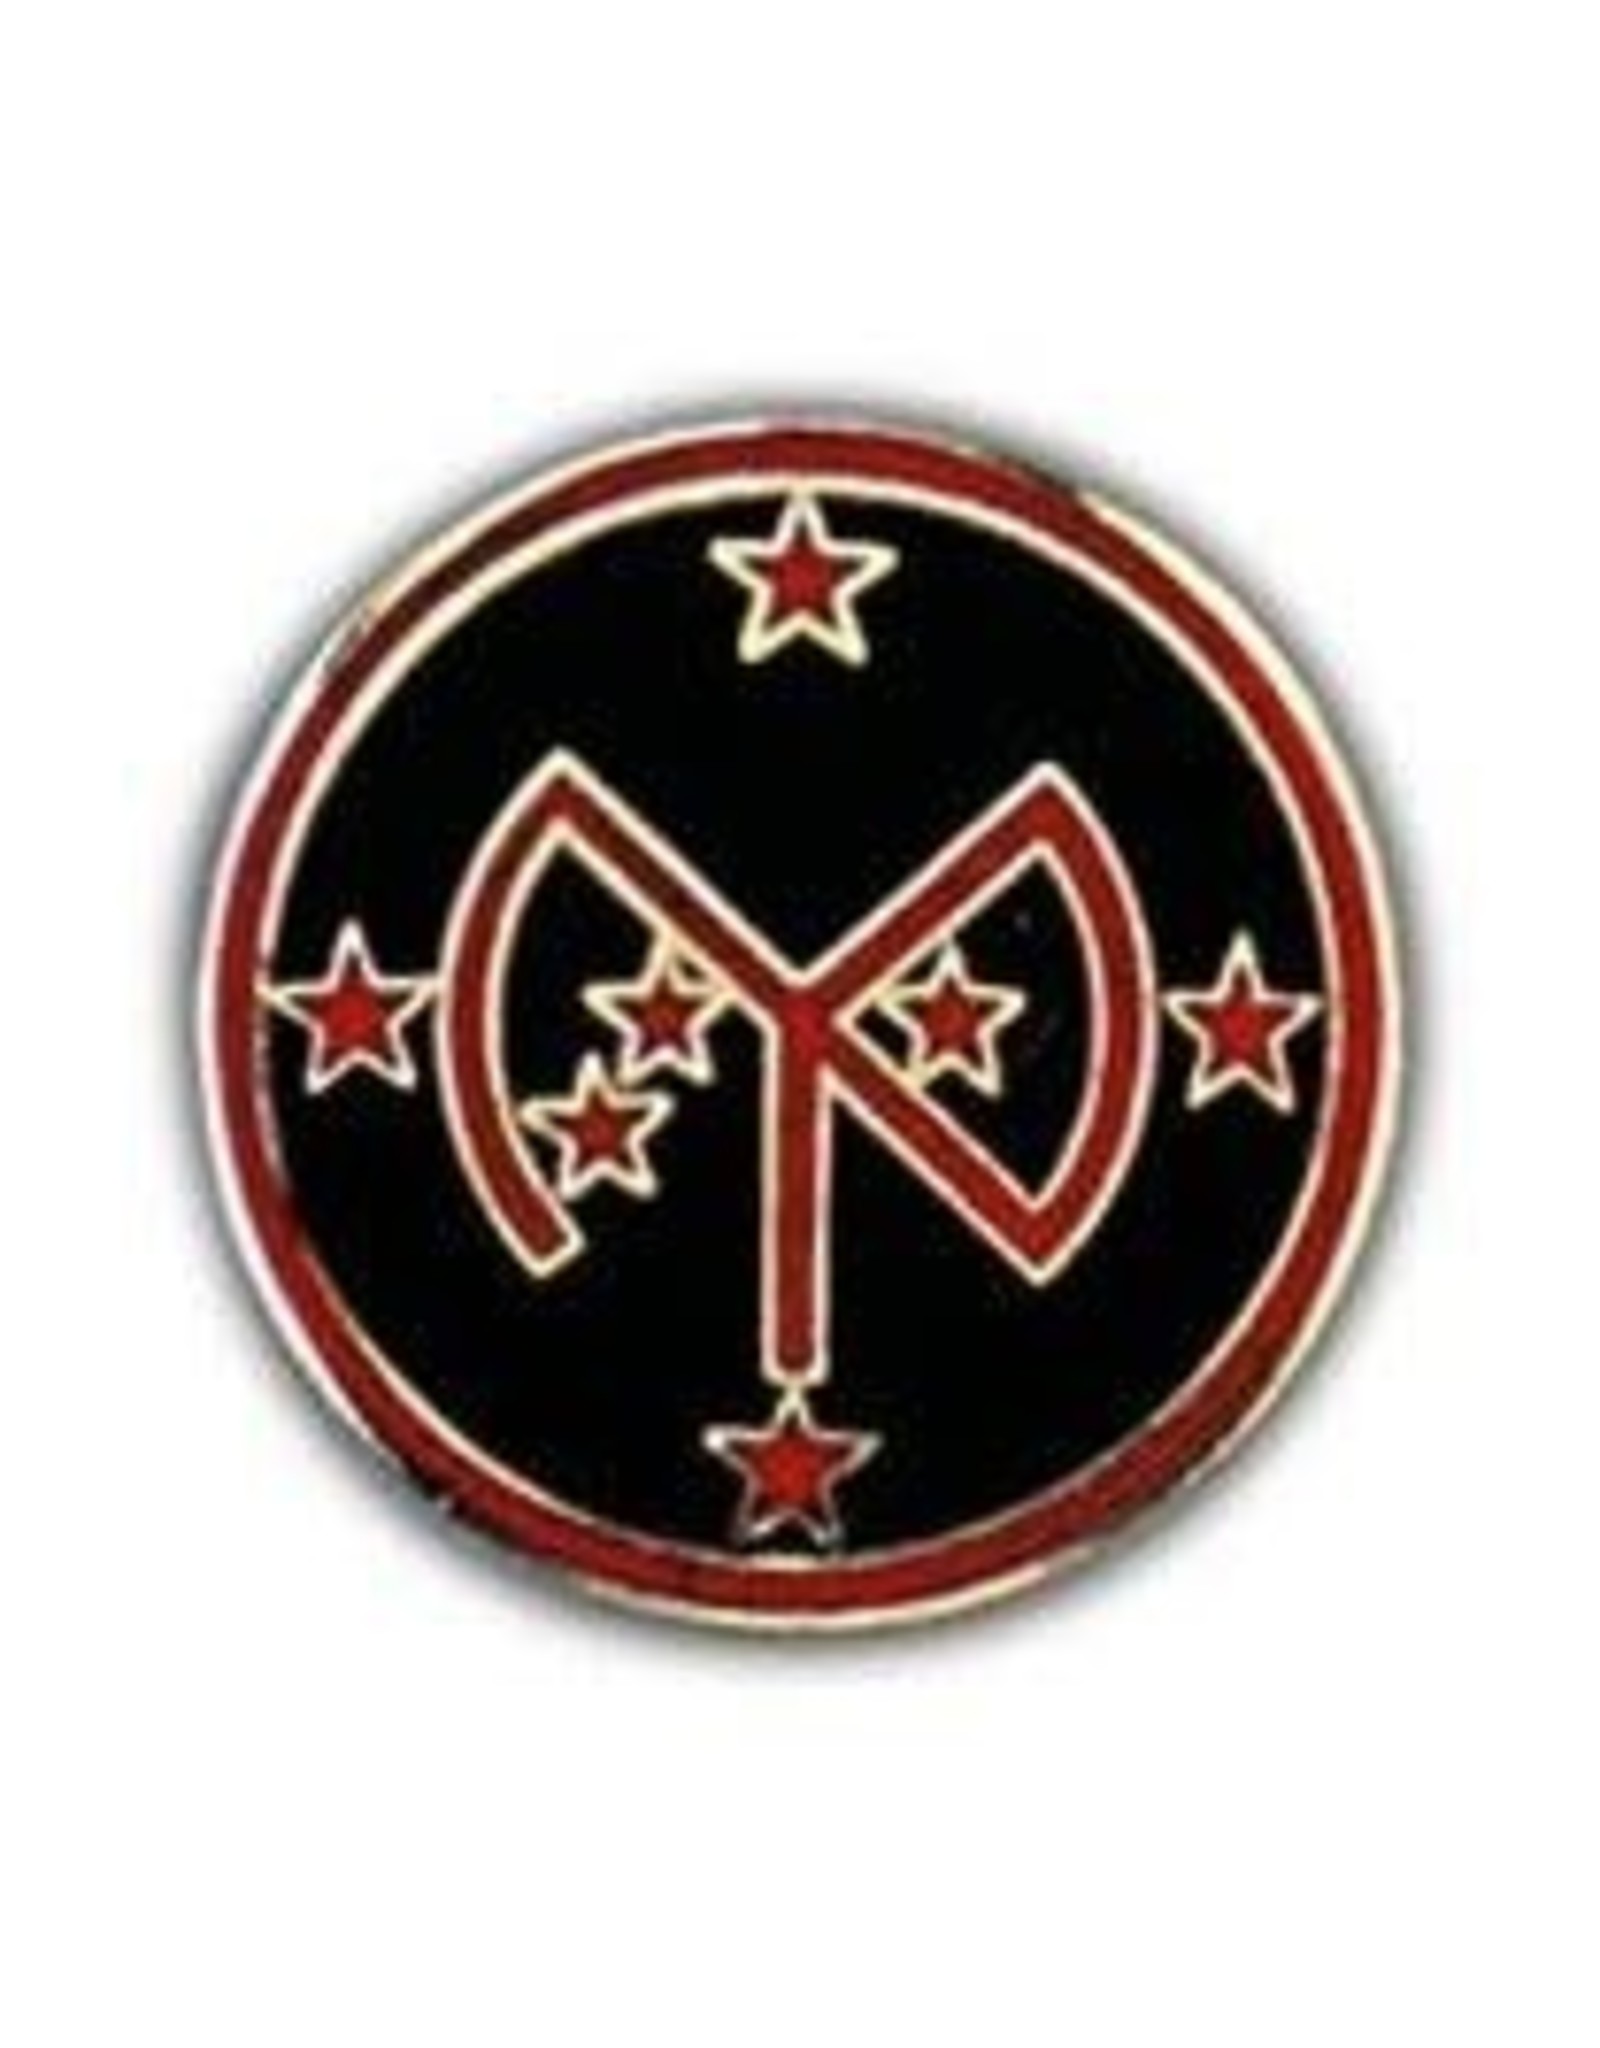 Pin - Army 027th Inf Div